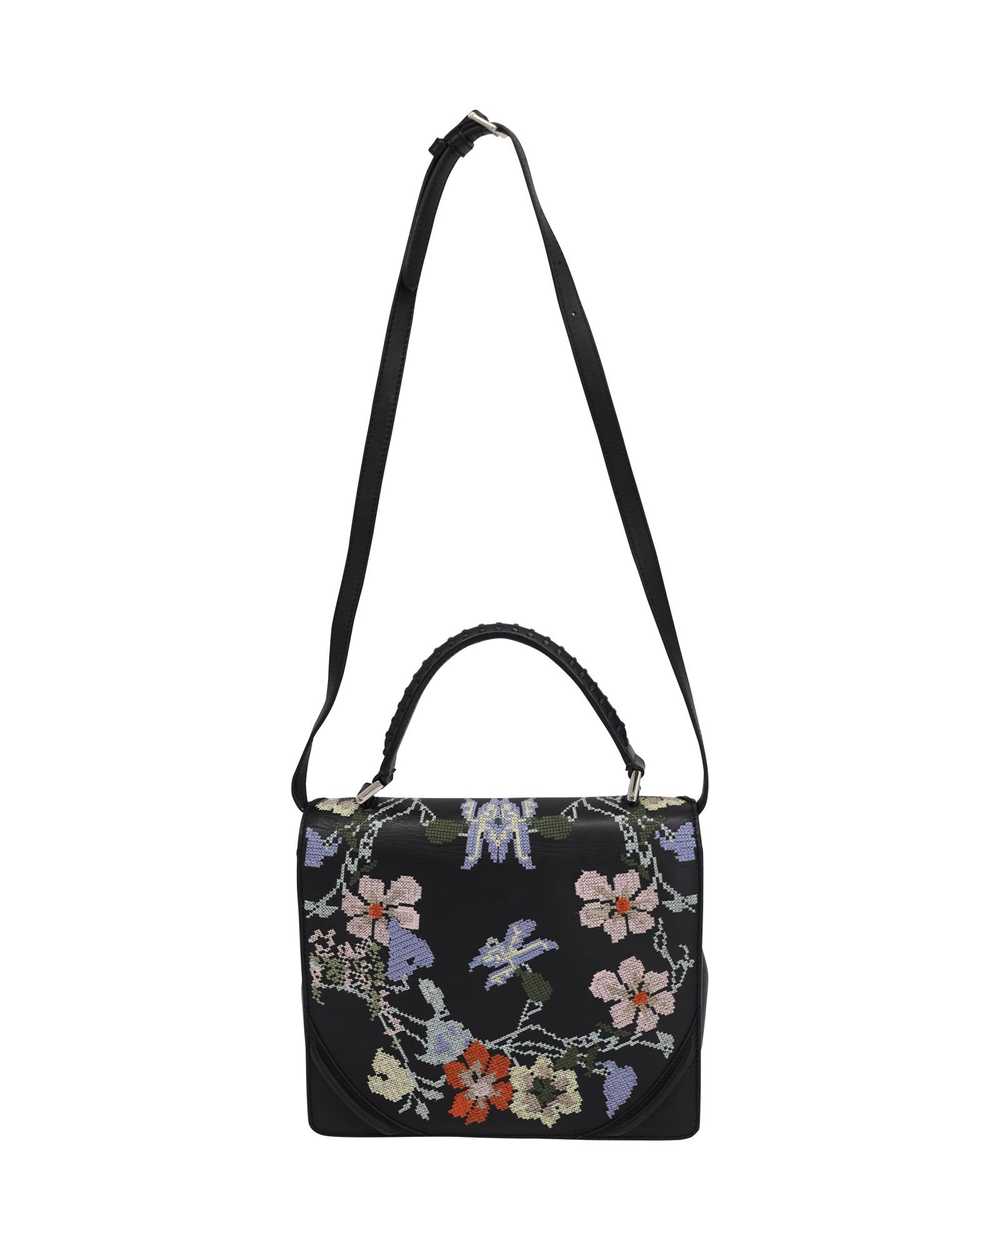 Product Details Floral Embroidered Top Handle Bag - image 4